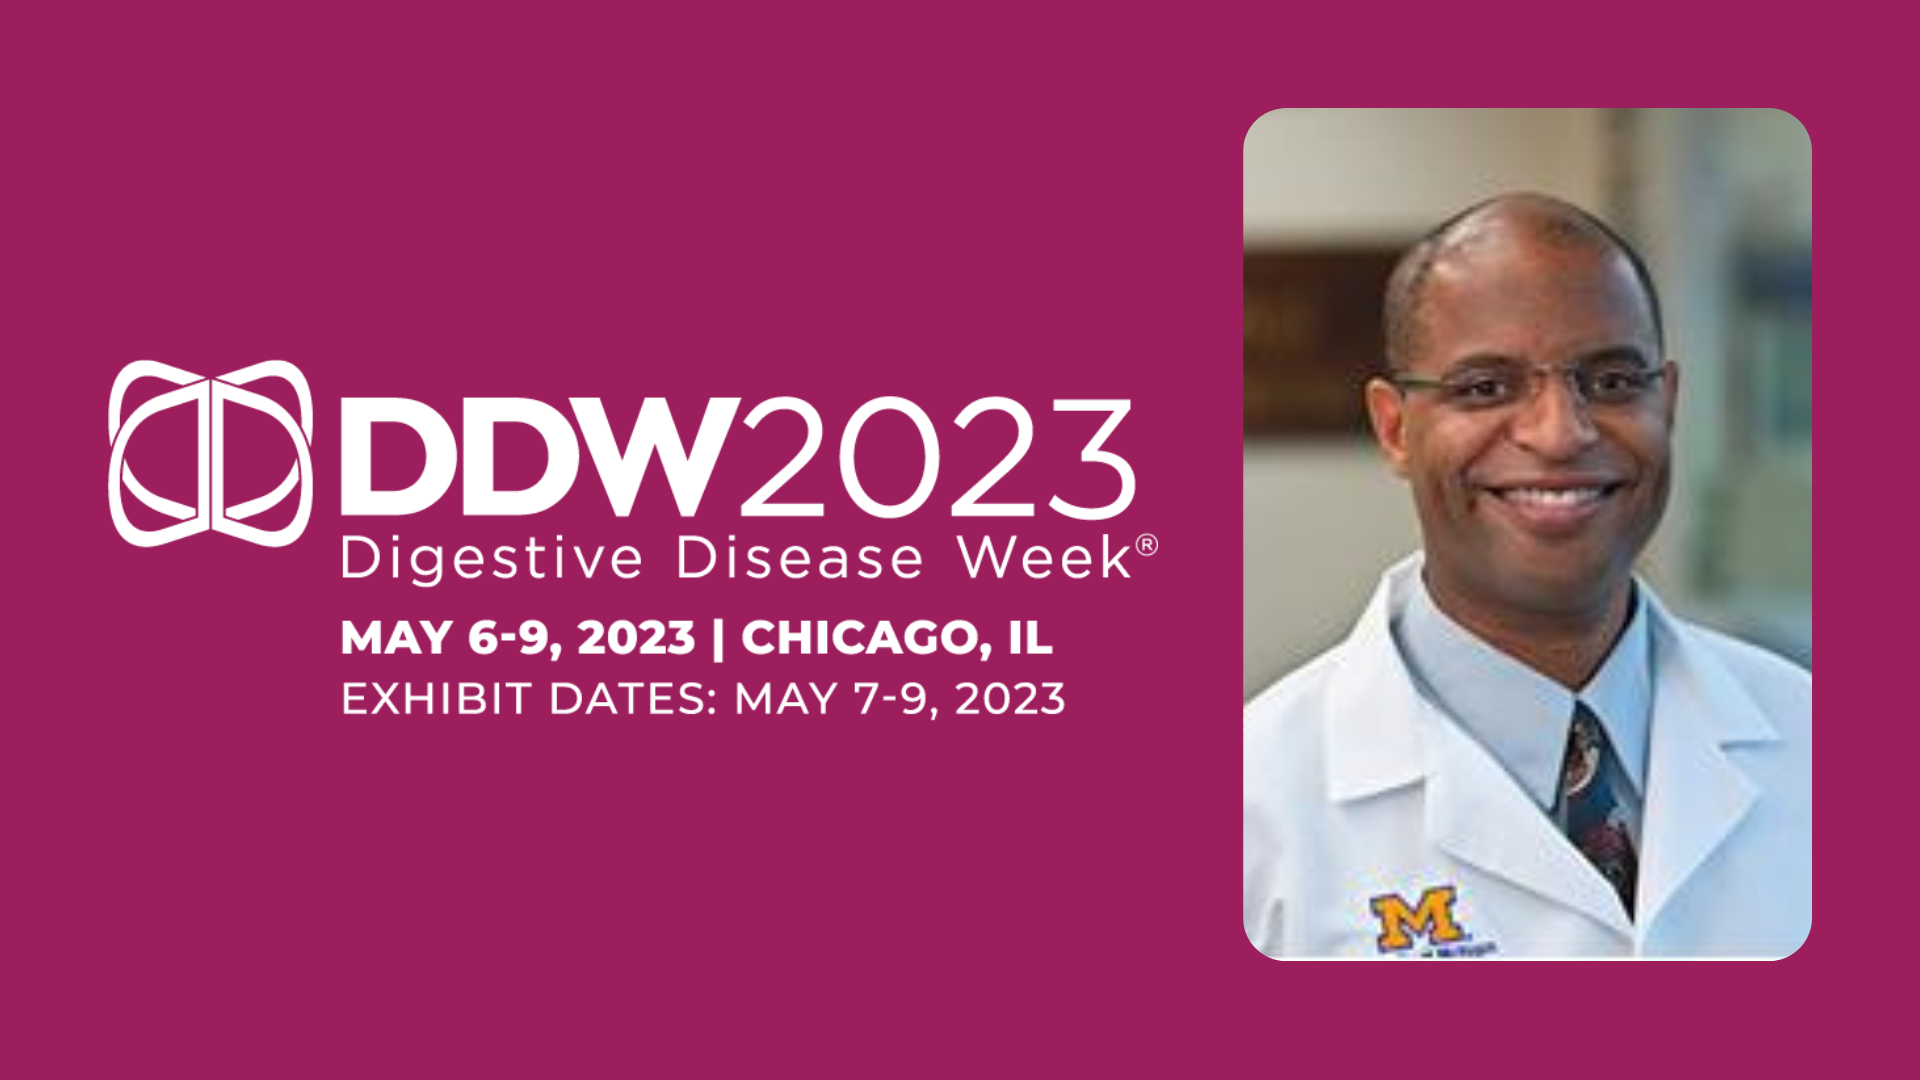 Sneak peek at this year’s DDW® 2023 Presidential Plenary with Dr